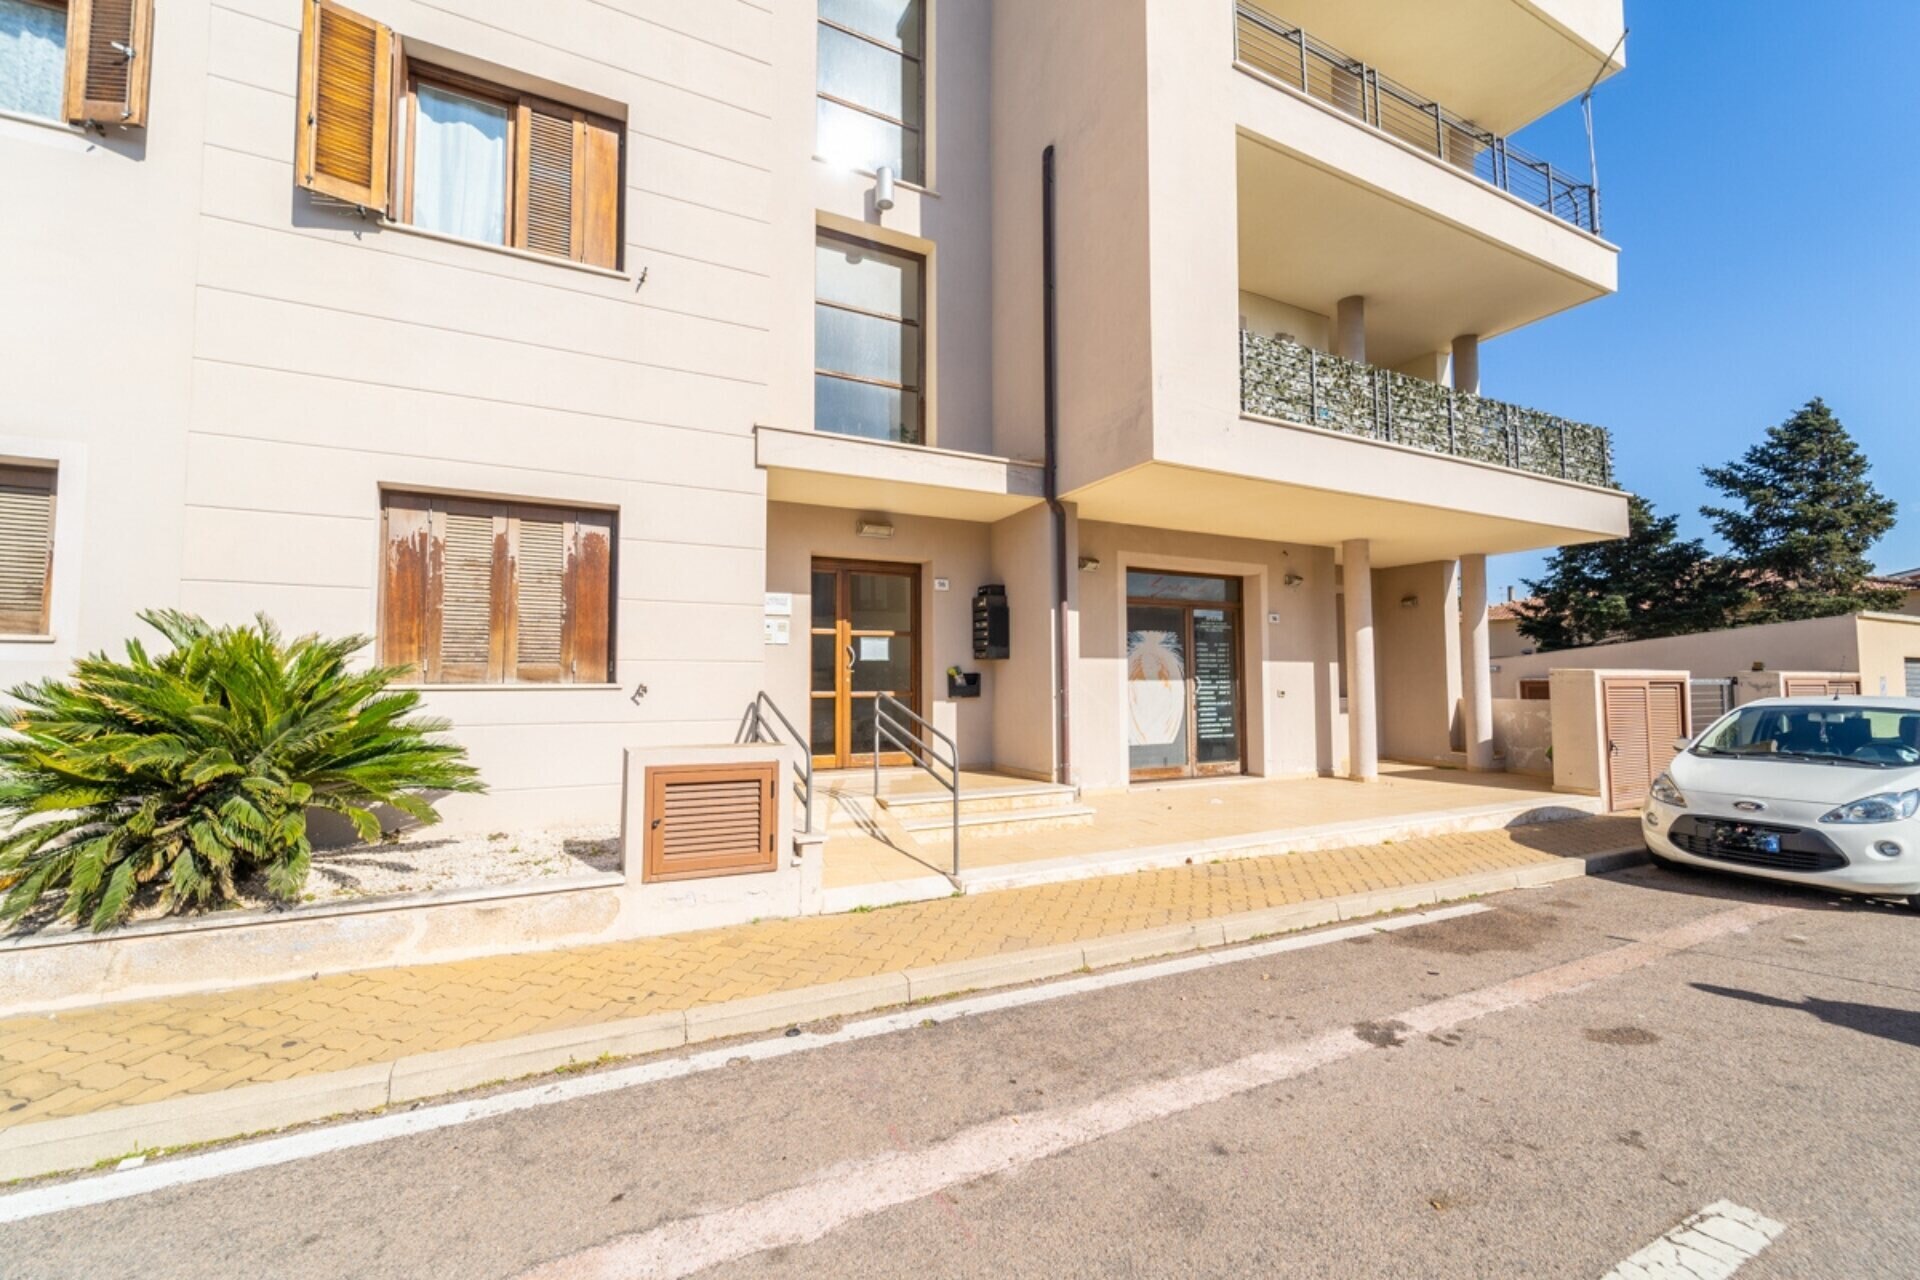  Commercial property in the heart of Olbia